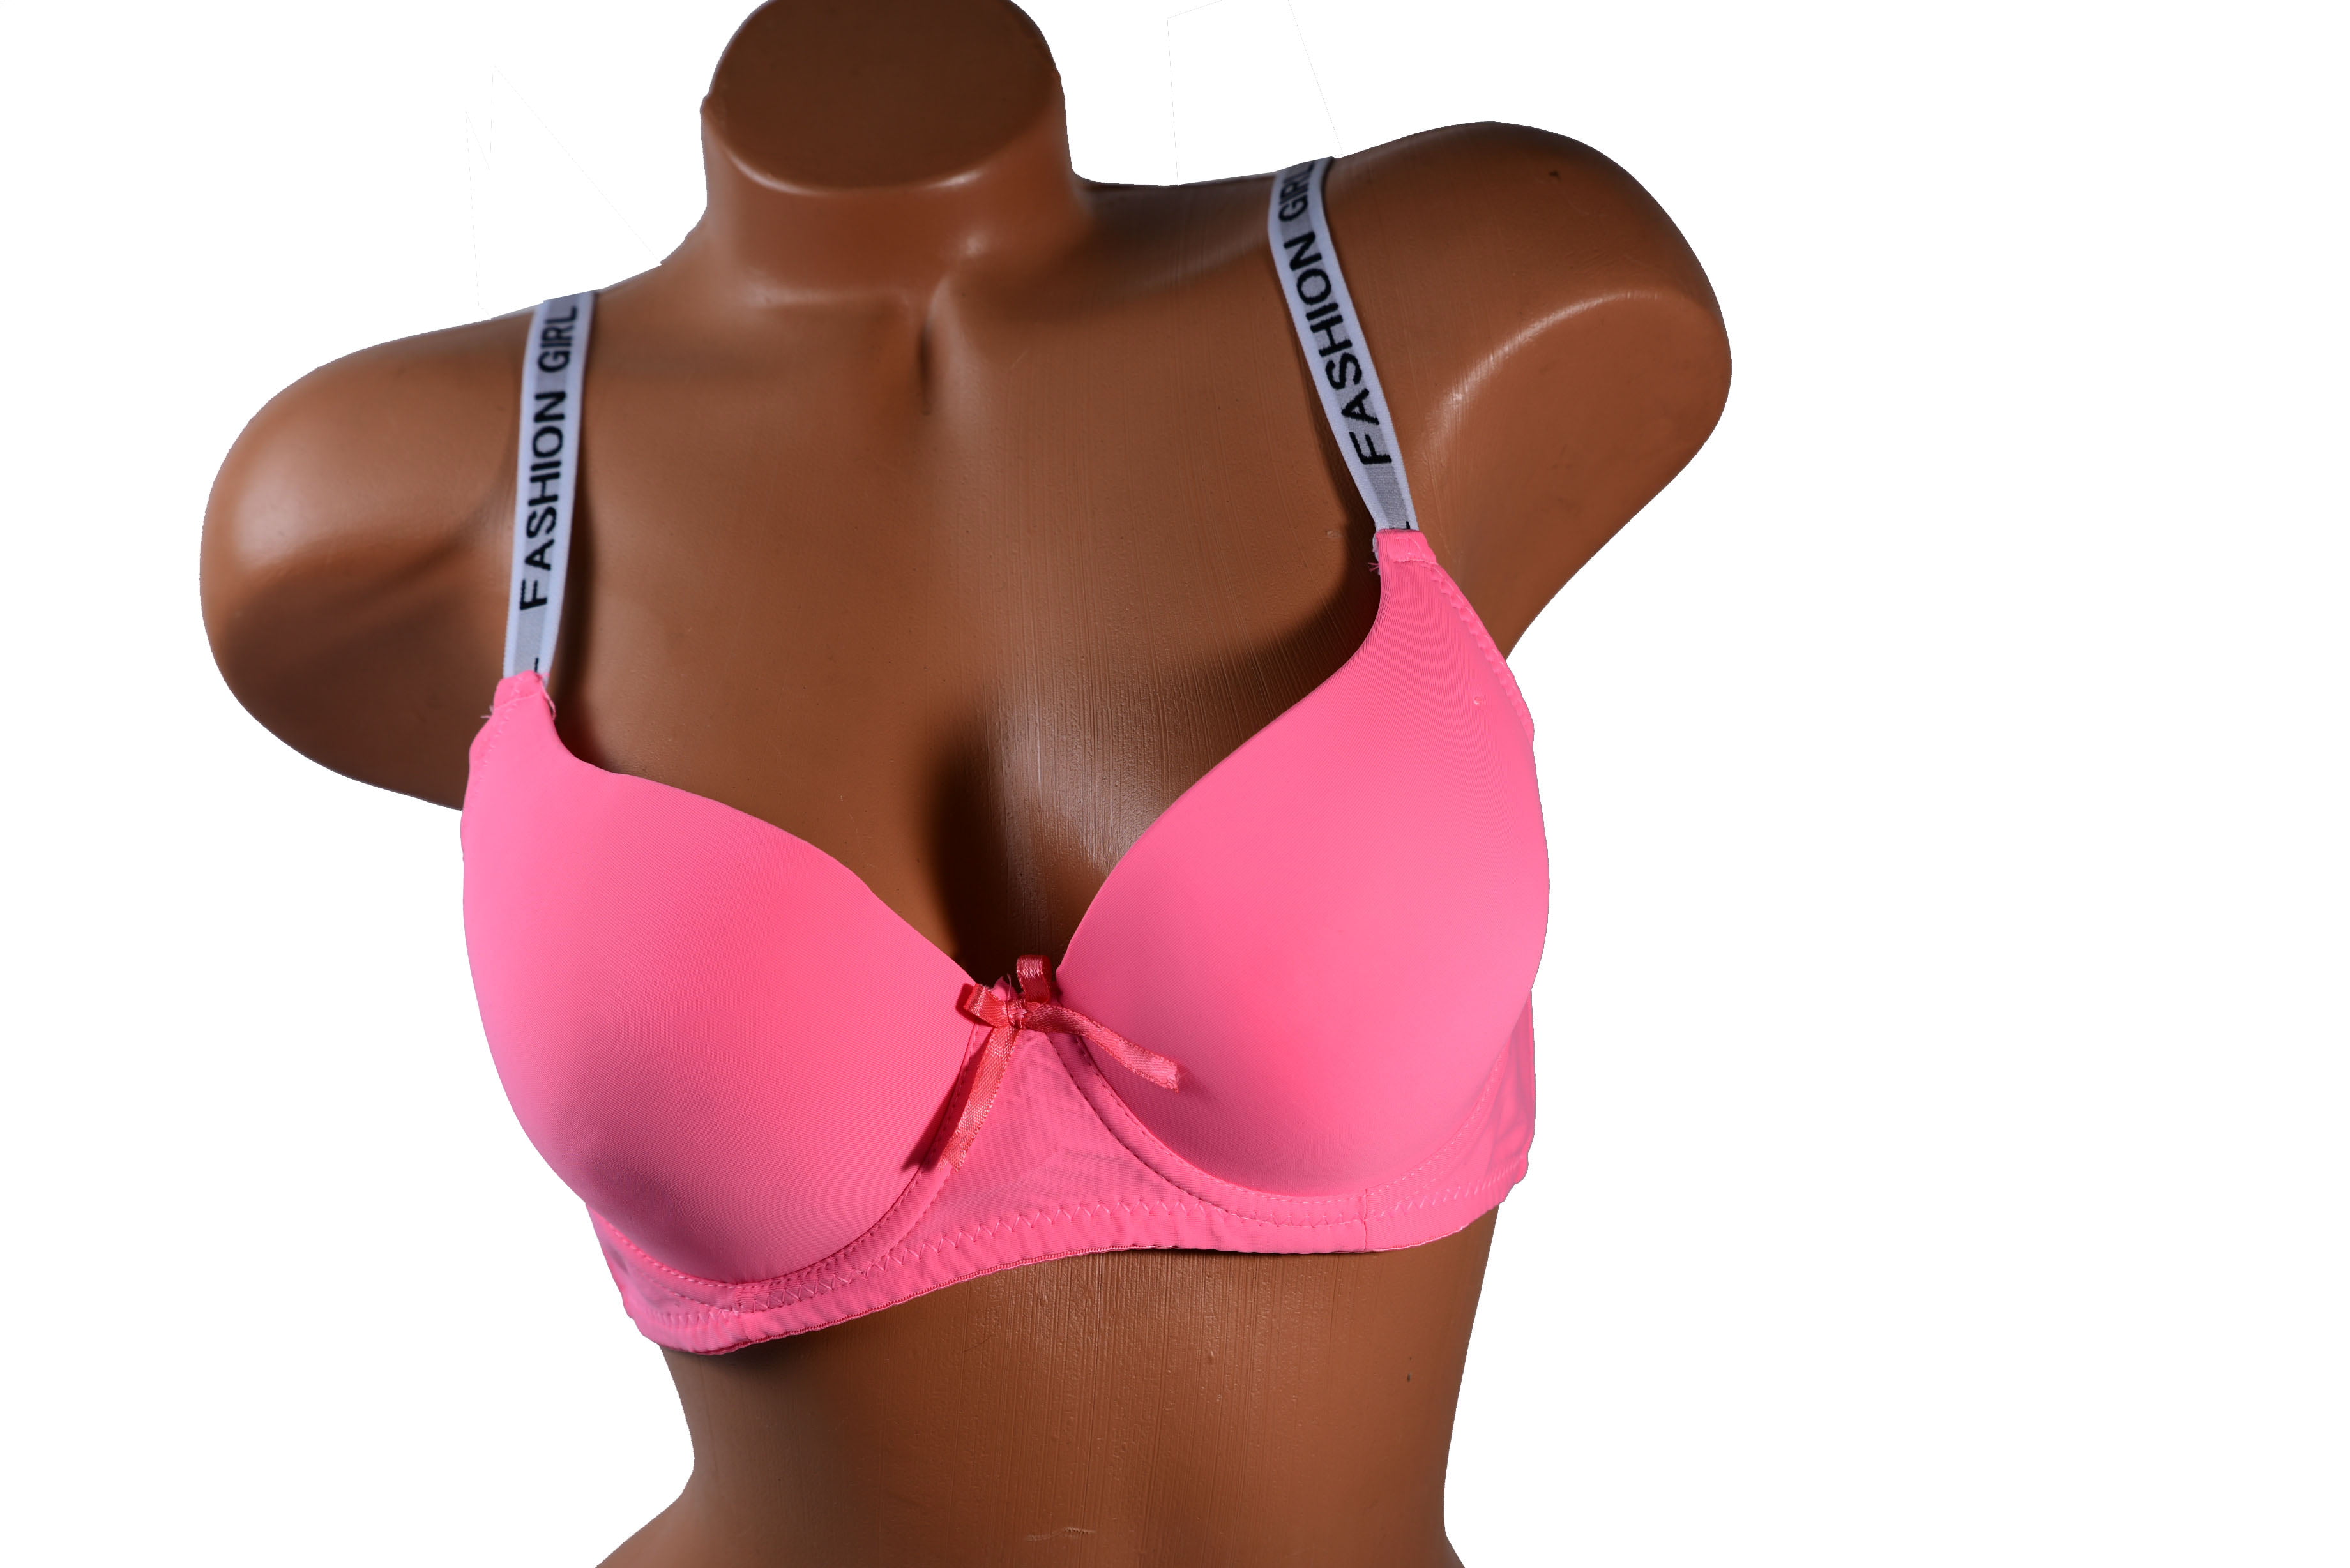 Women Bras 6 pack of Bra B cup C cup D cup DD cup Size 36C (6627) 